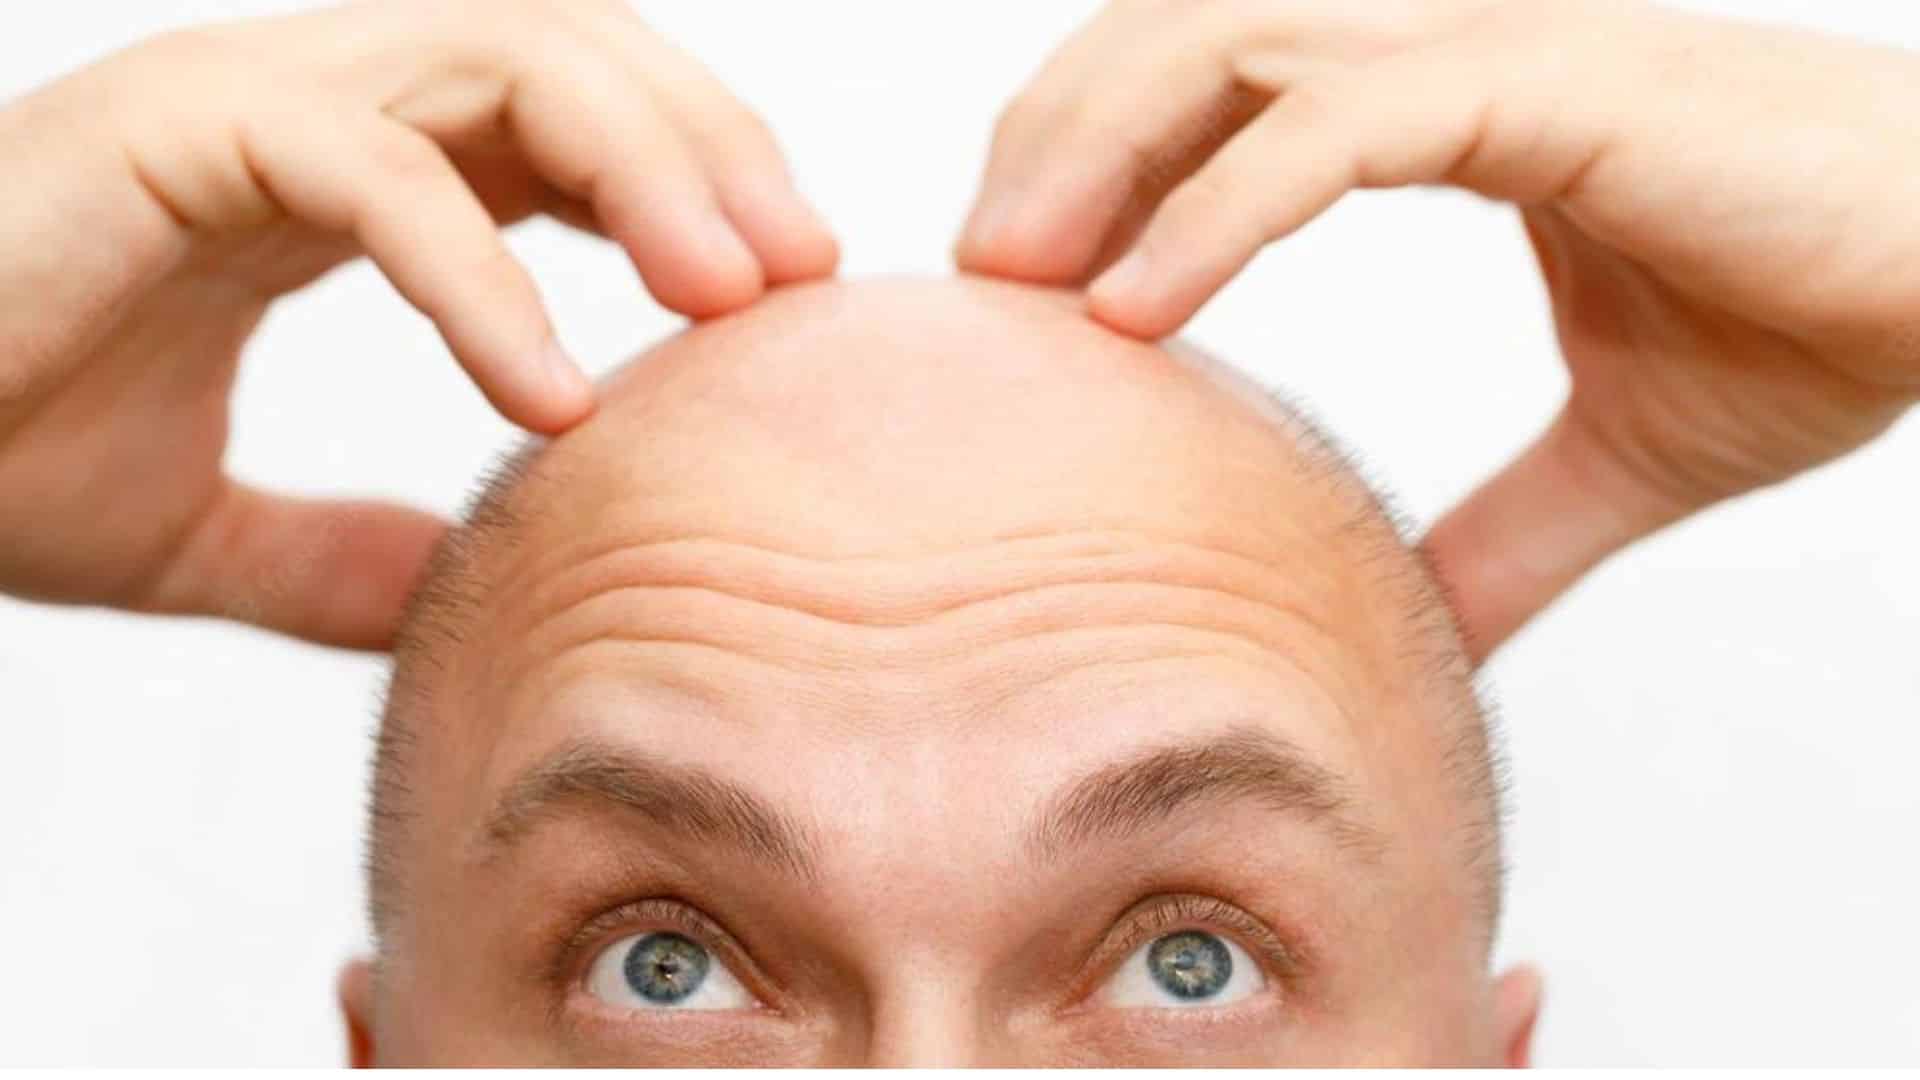 How Much Does Hair Transplant Cost?